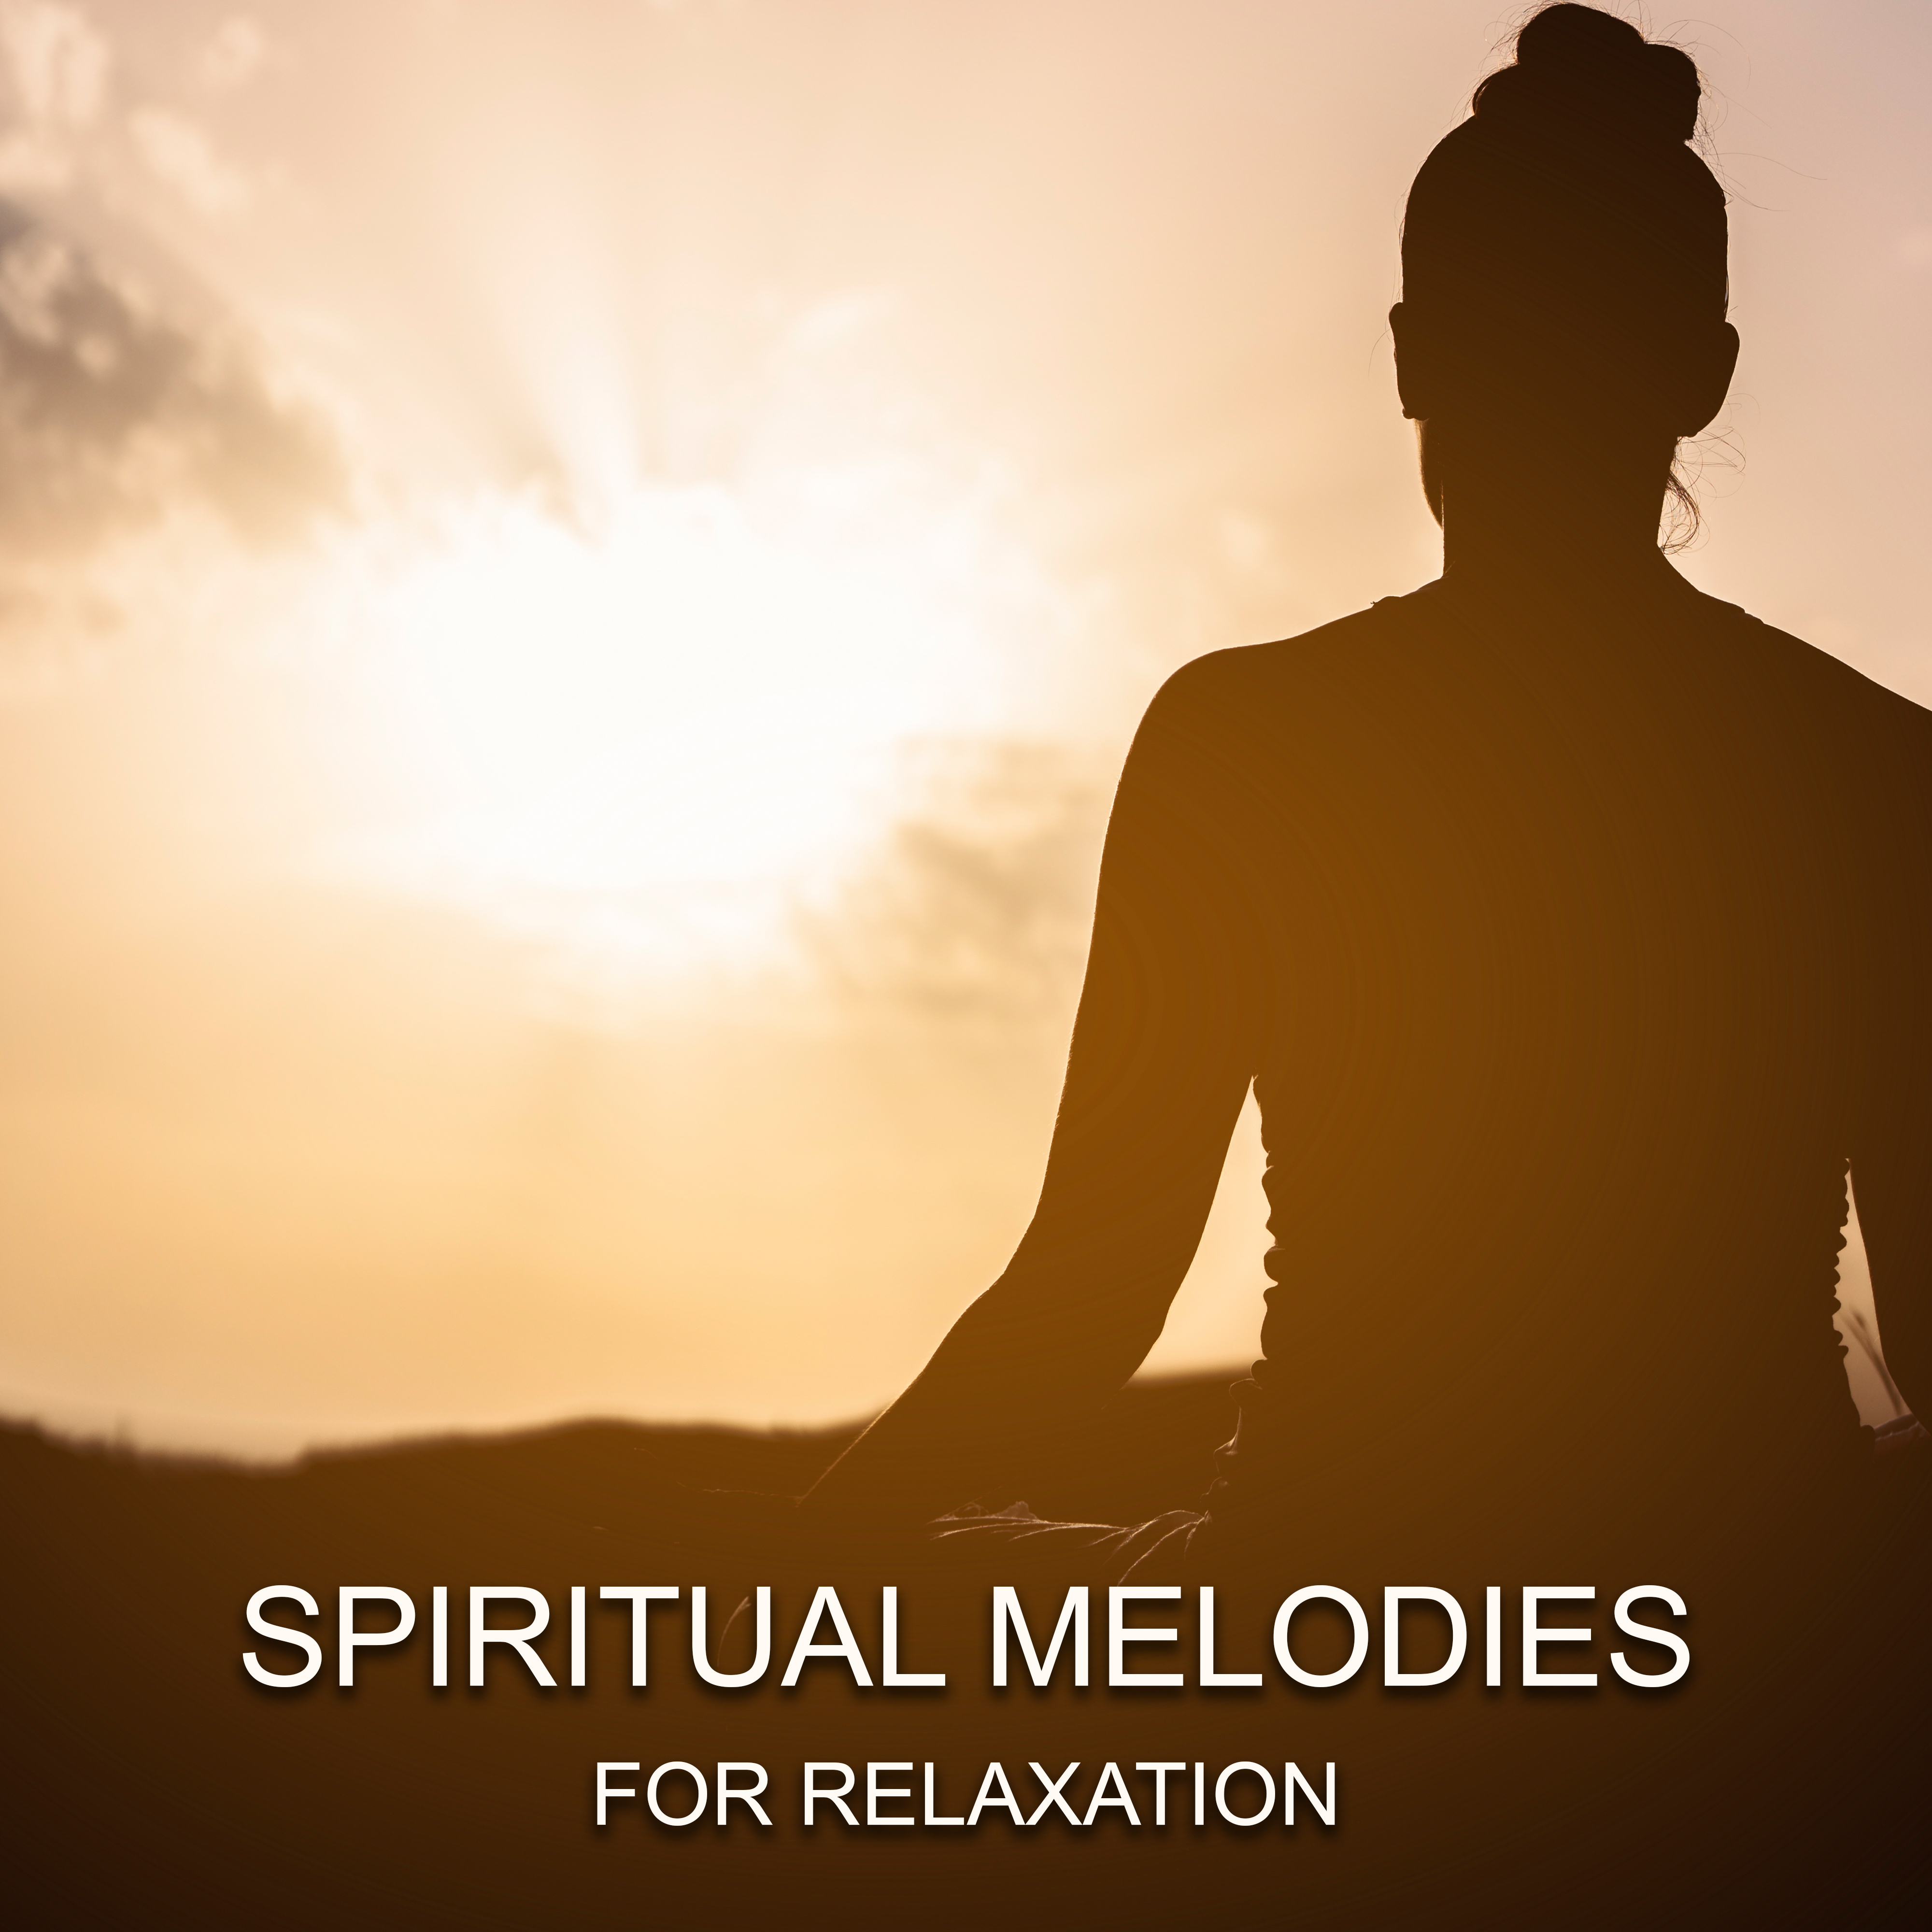 Spiritual Melodies for Relaxation